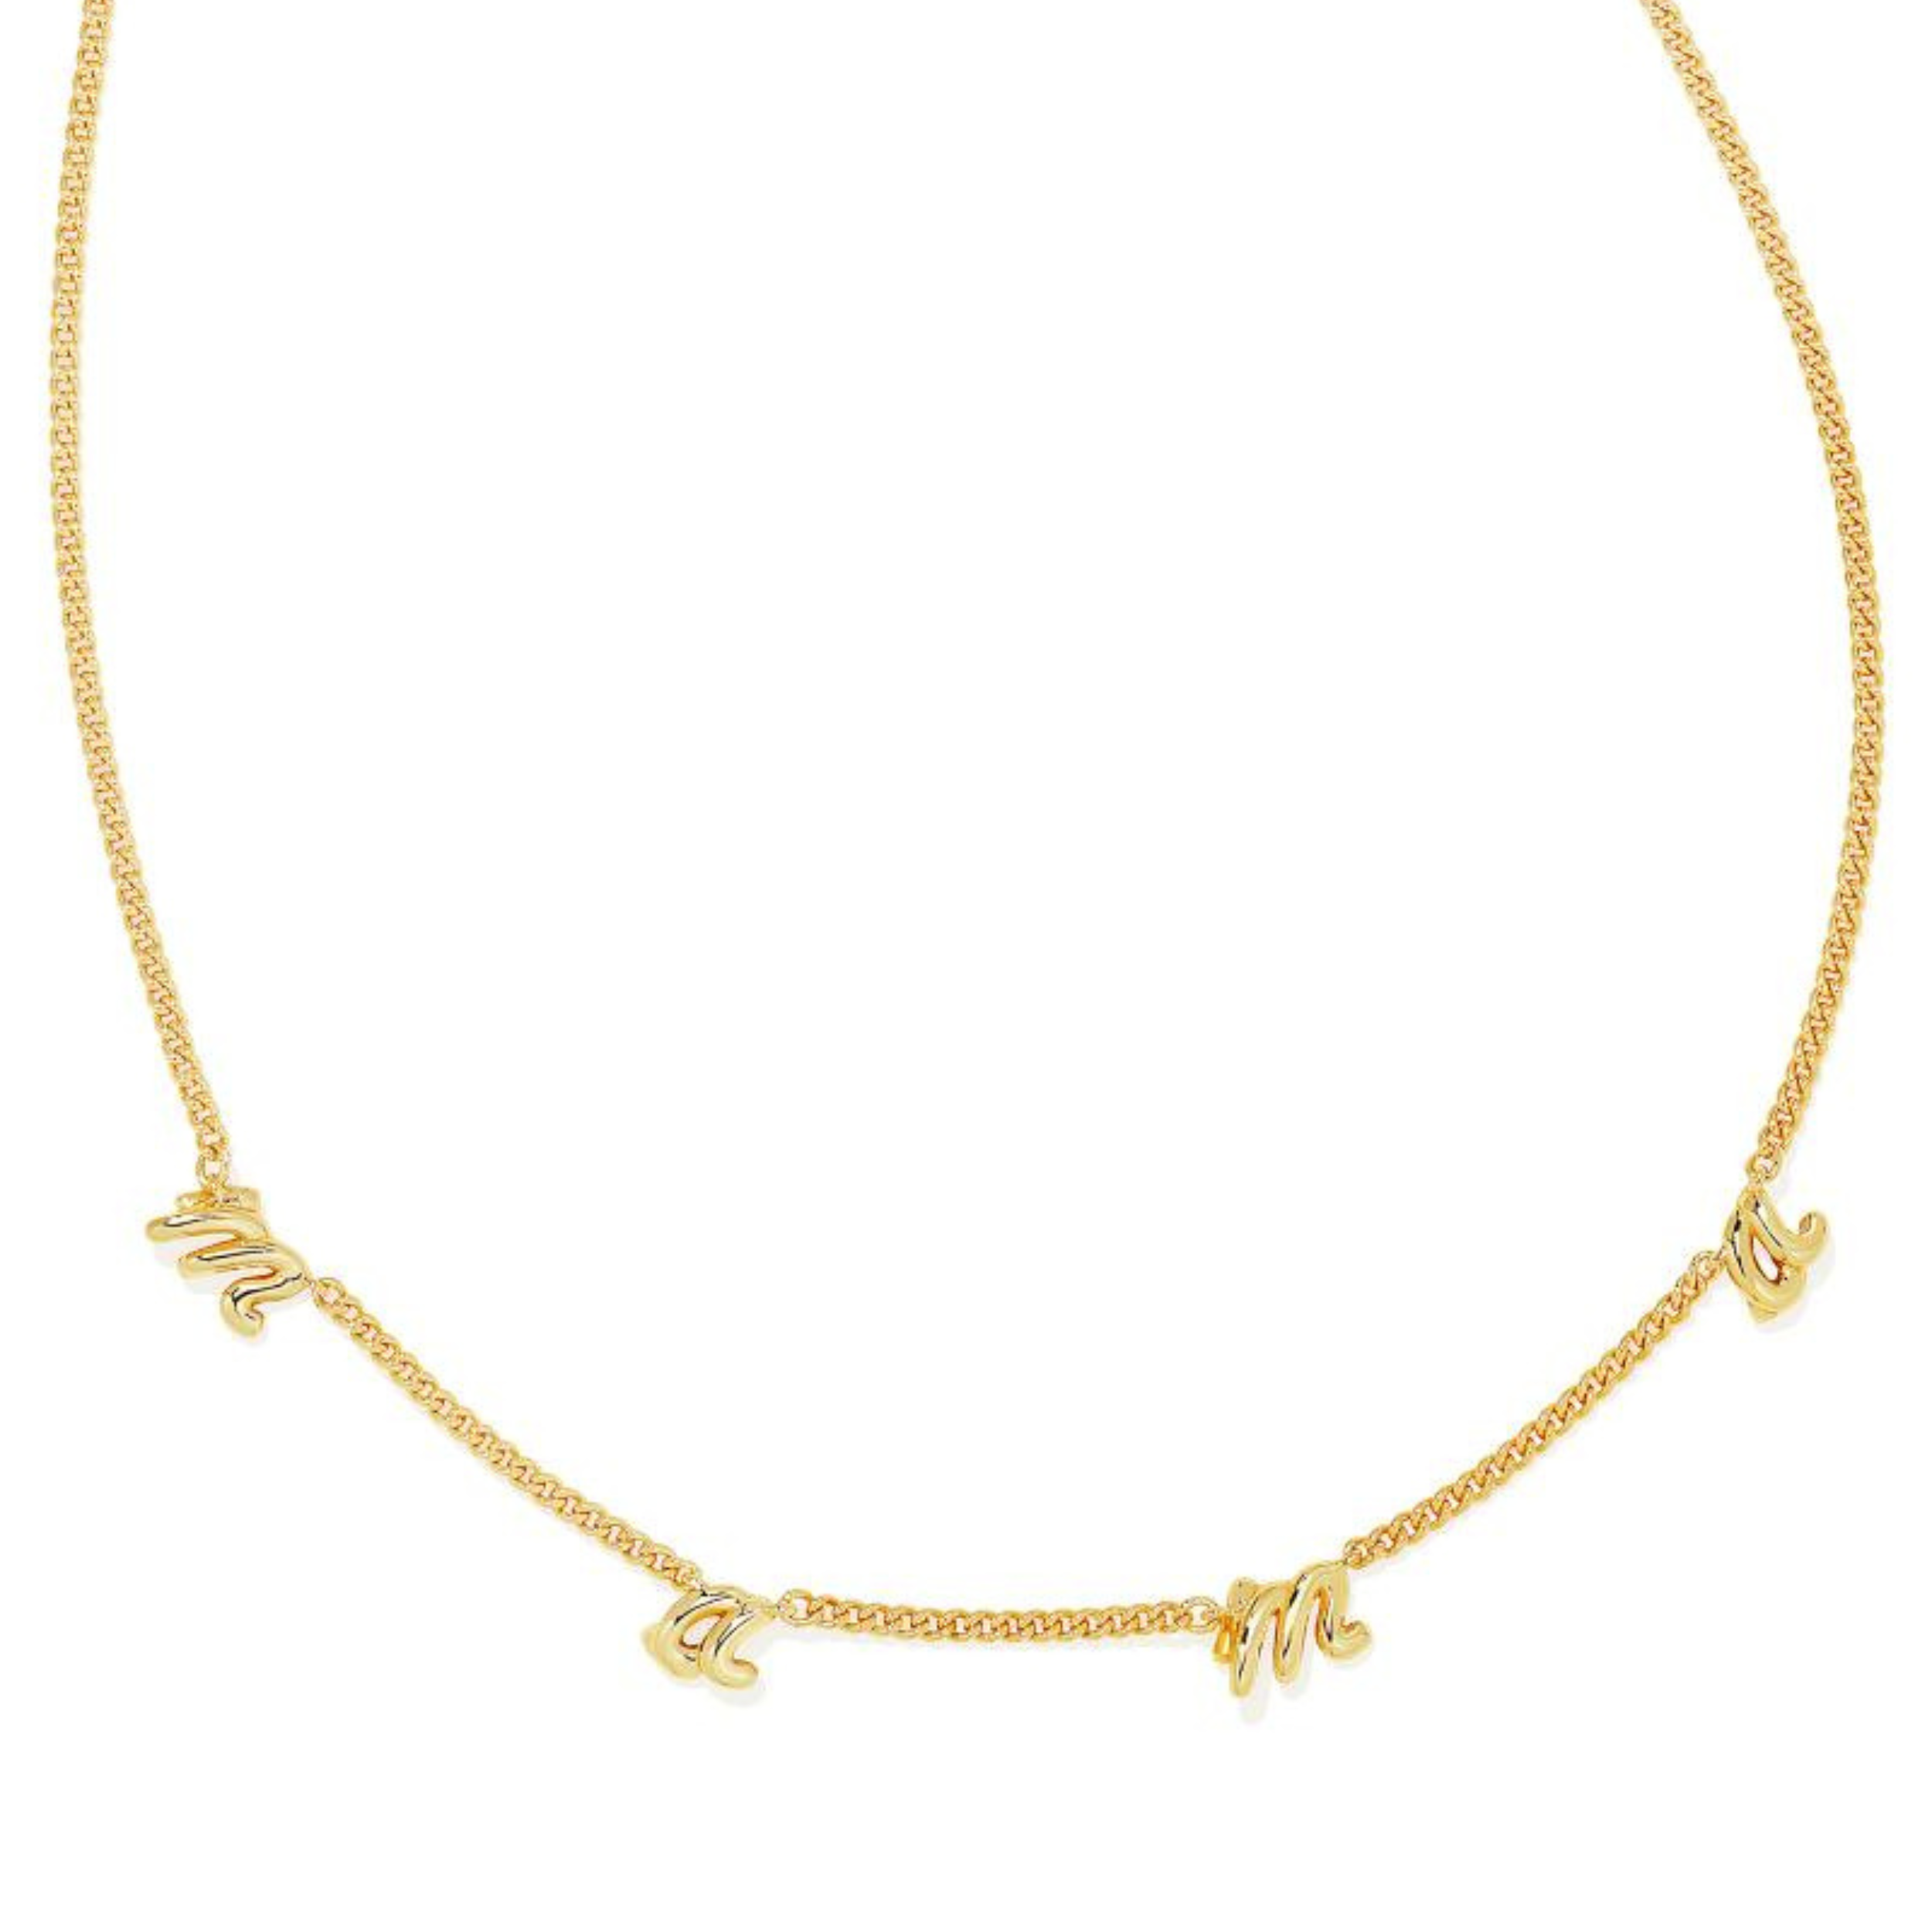 A gold necklace with the word mama spaced out along the necklace, pictured on a white background.